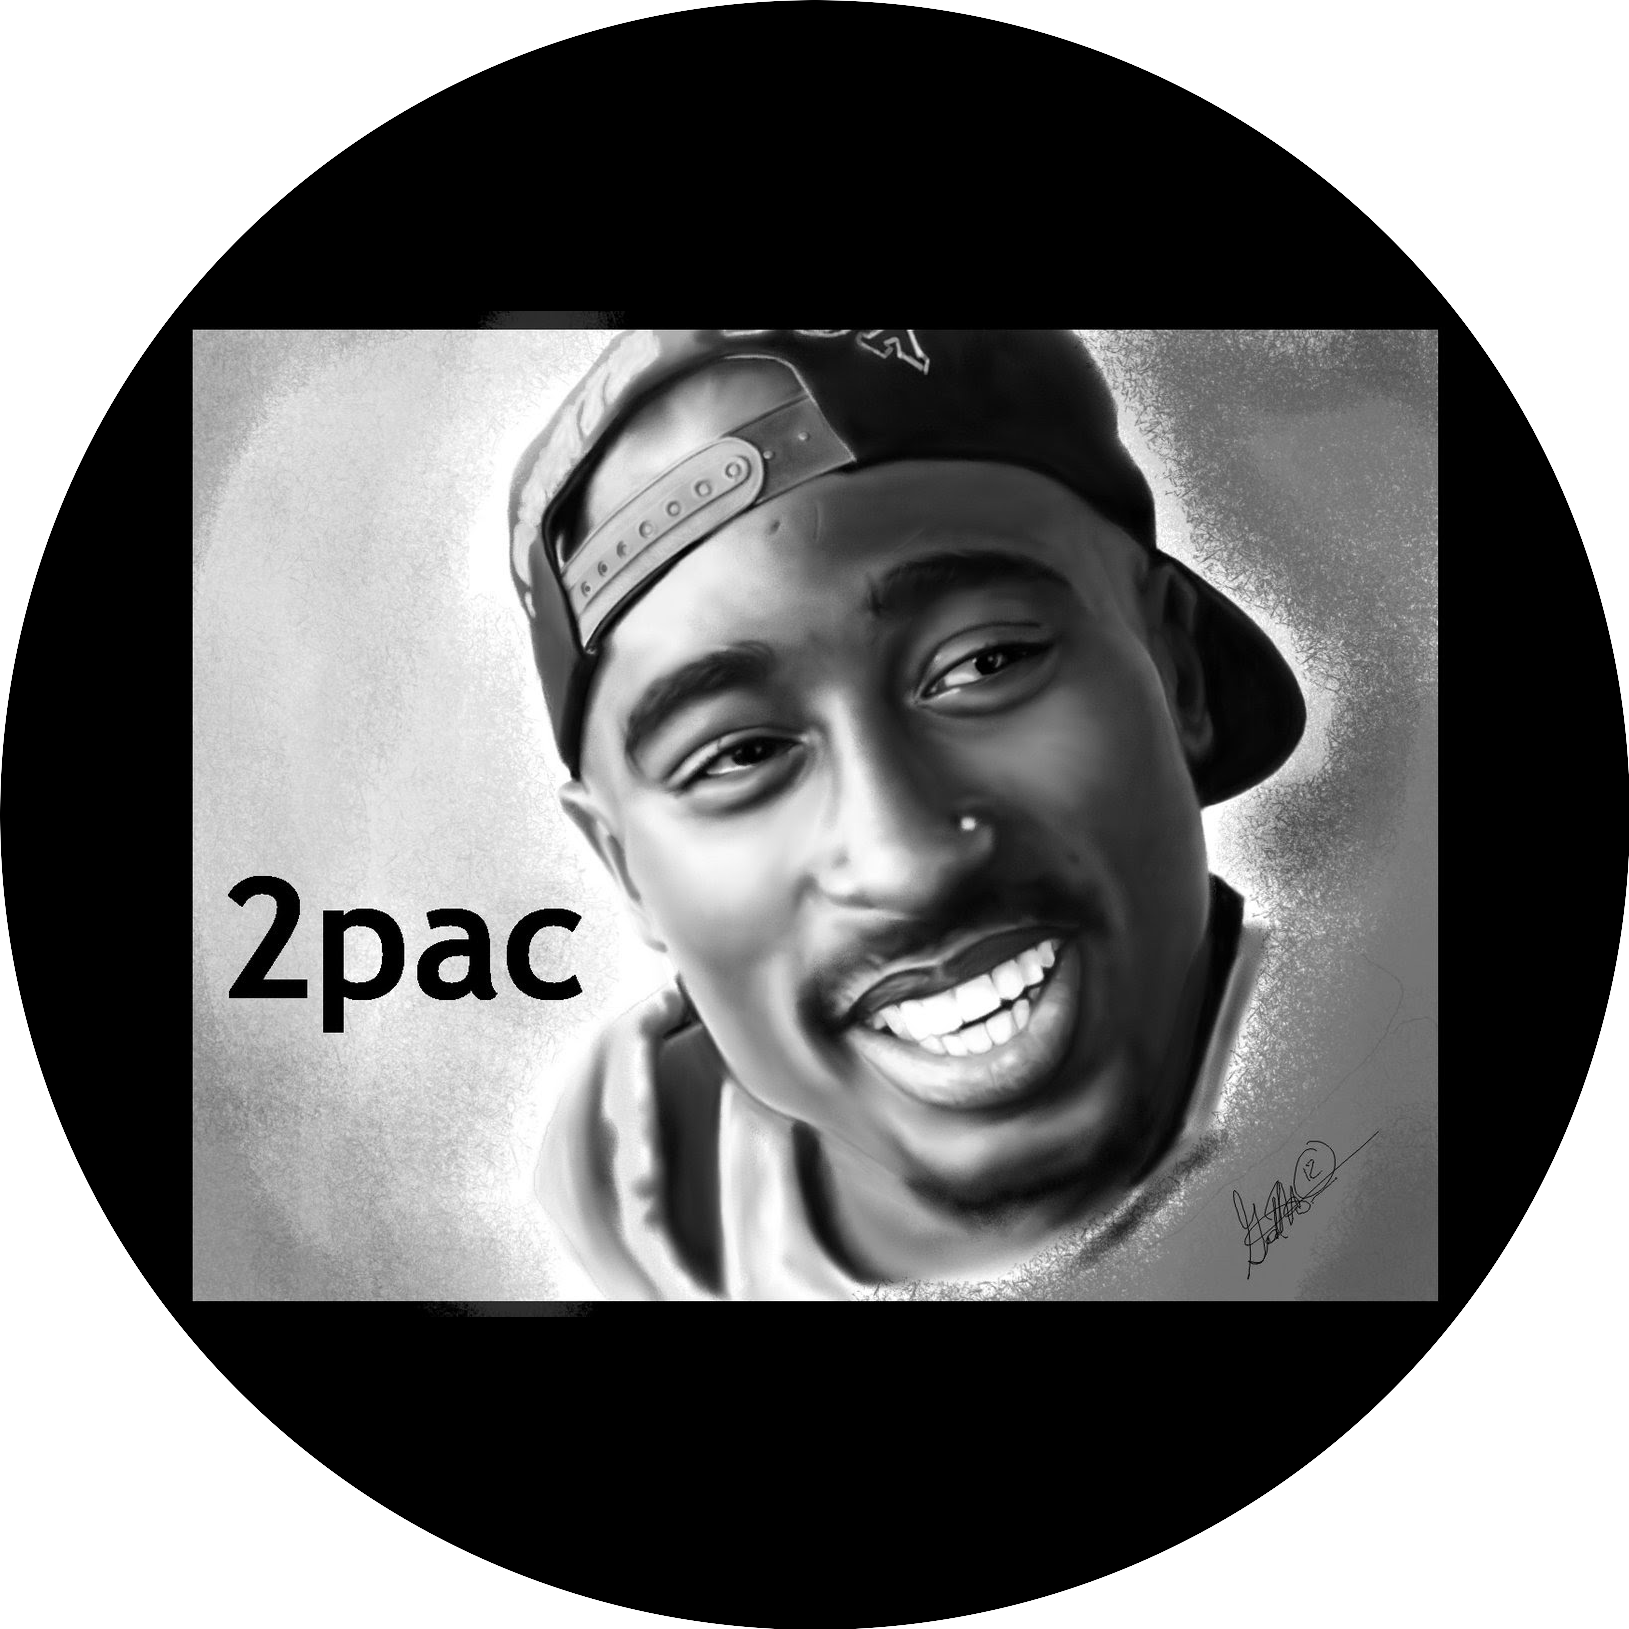 2 Pac Tupac Black and White Photo Edible Cake Topper Image ABPID10356